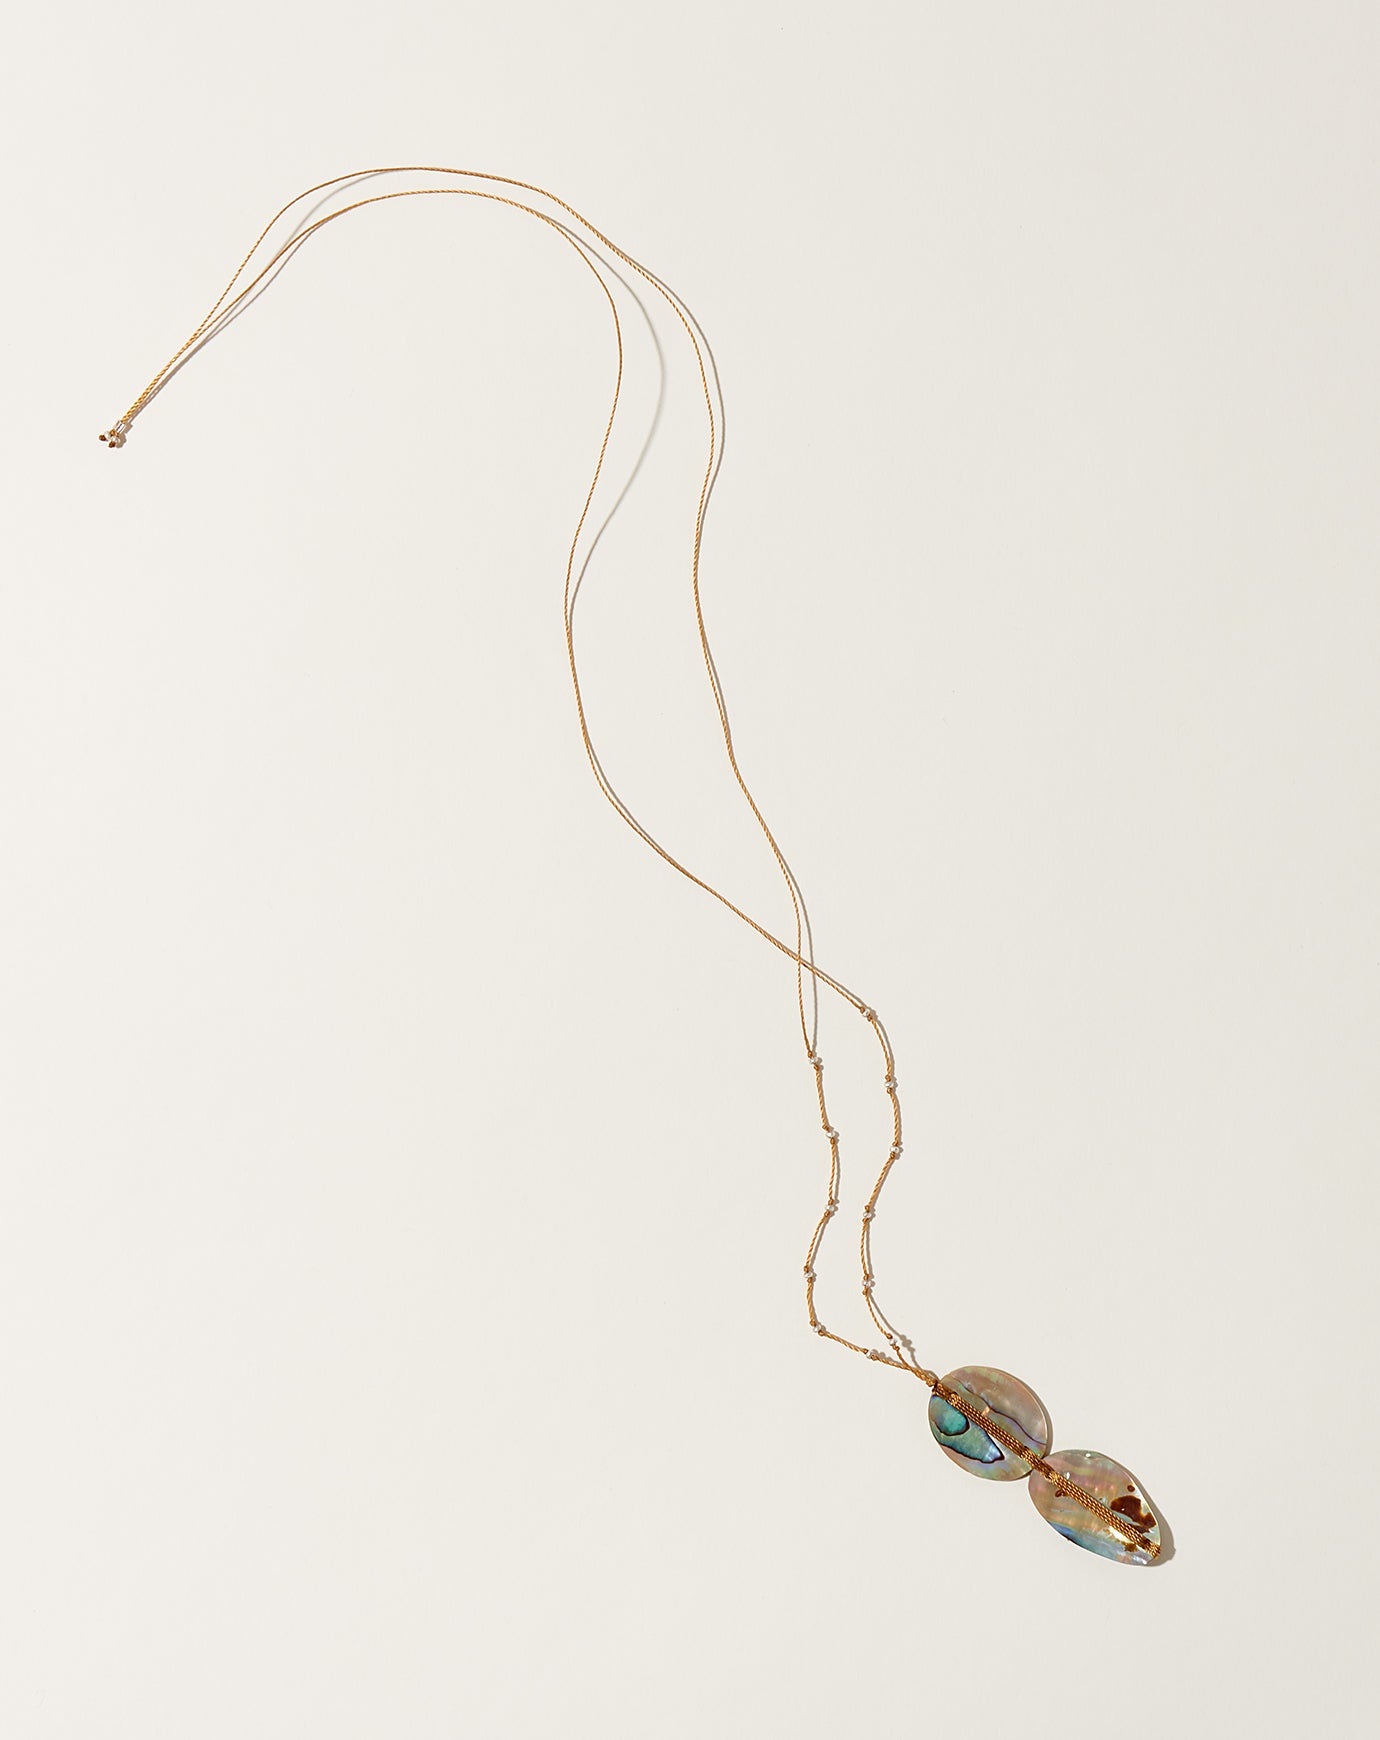 See Real Flowers Woven Abalone Necklace